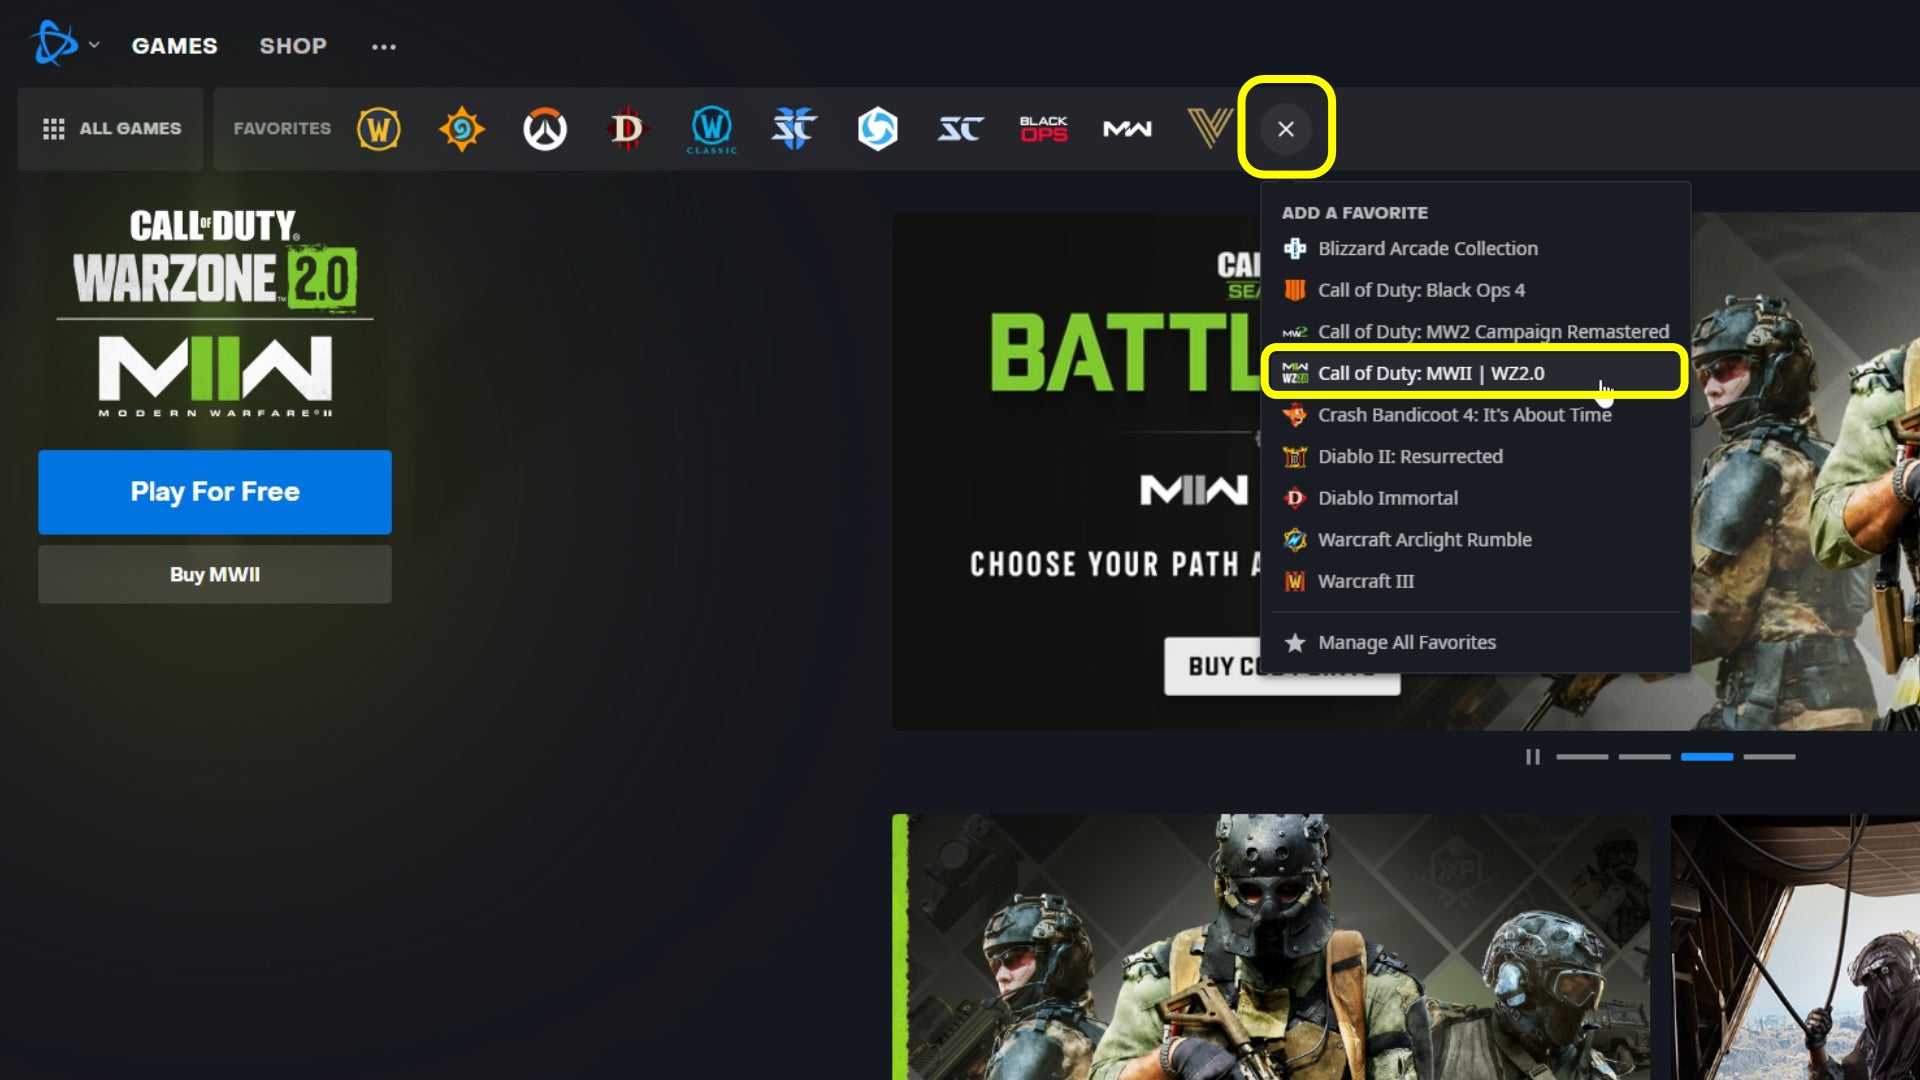 A screenshot of the Battle.NET launcher, with the Plus icon on the favourites bar expanded and Warzone 2 highlighted in the drop-down menu.